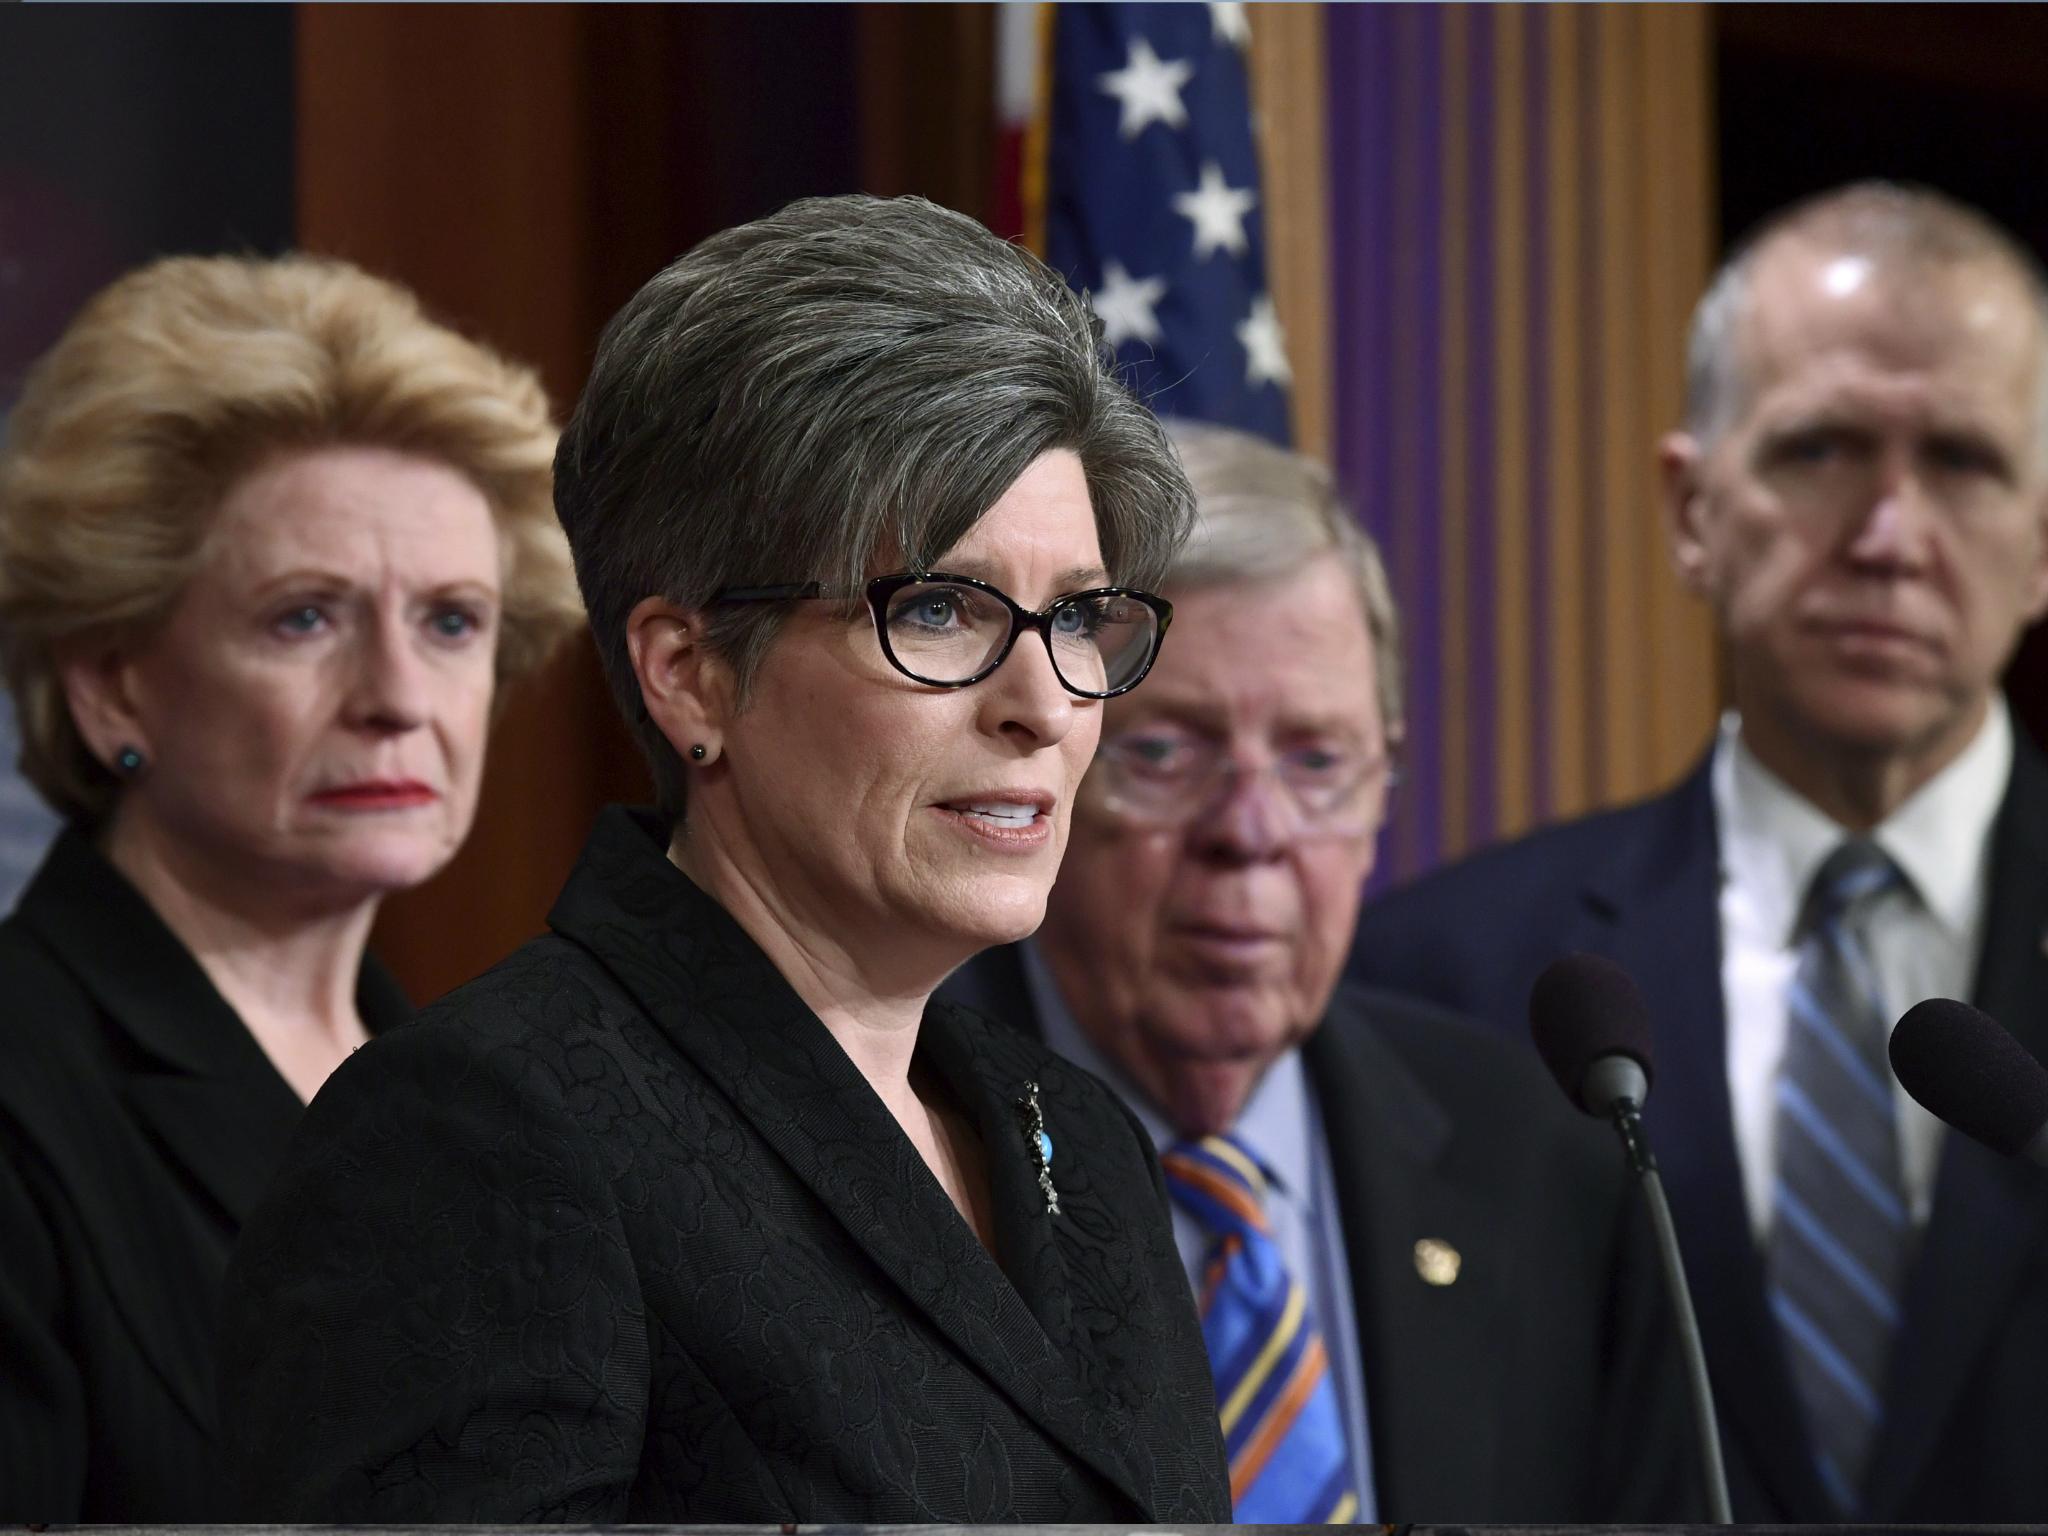 Senator Joni Ernst spoke in Washington 7 February 2018 to announce a bipartisan resolution to have a special committee investigate the US Olympic Committee and USA Gymnastics